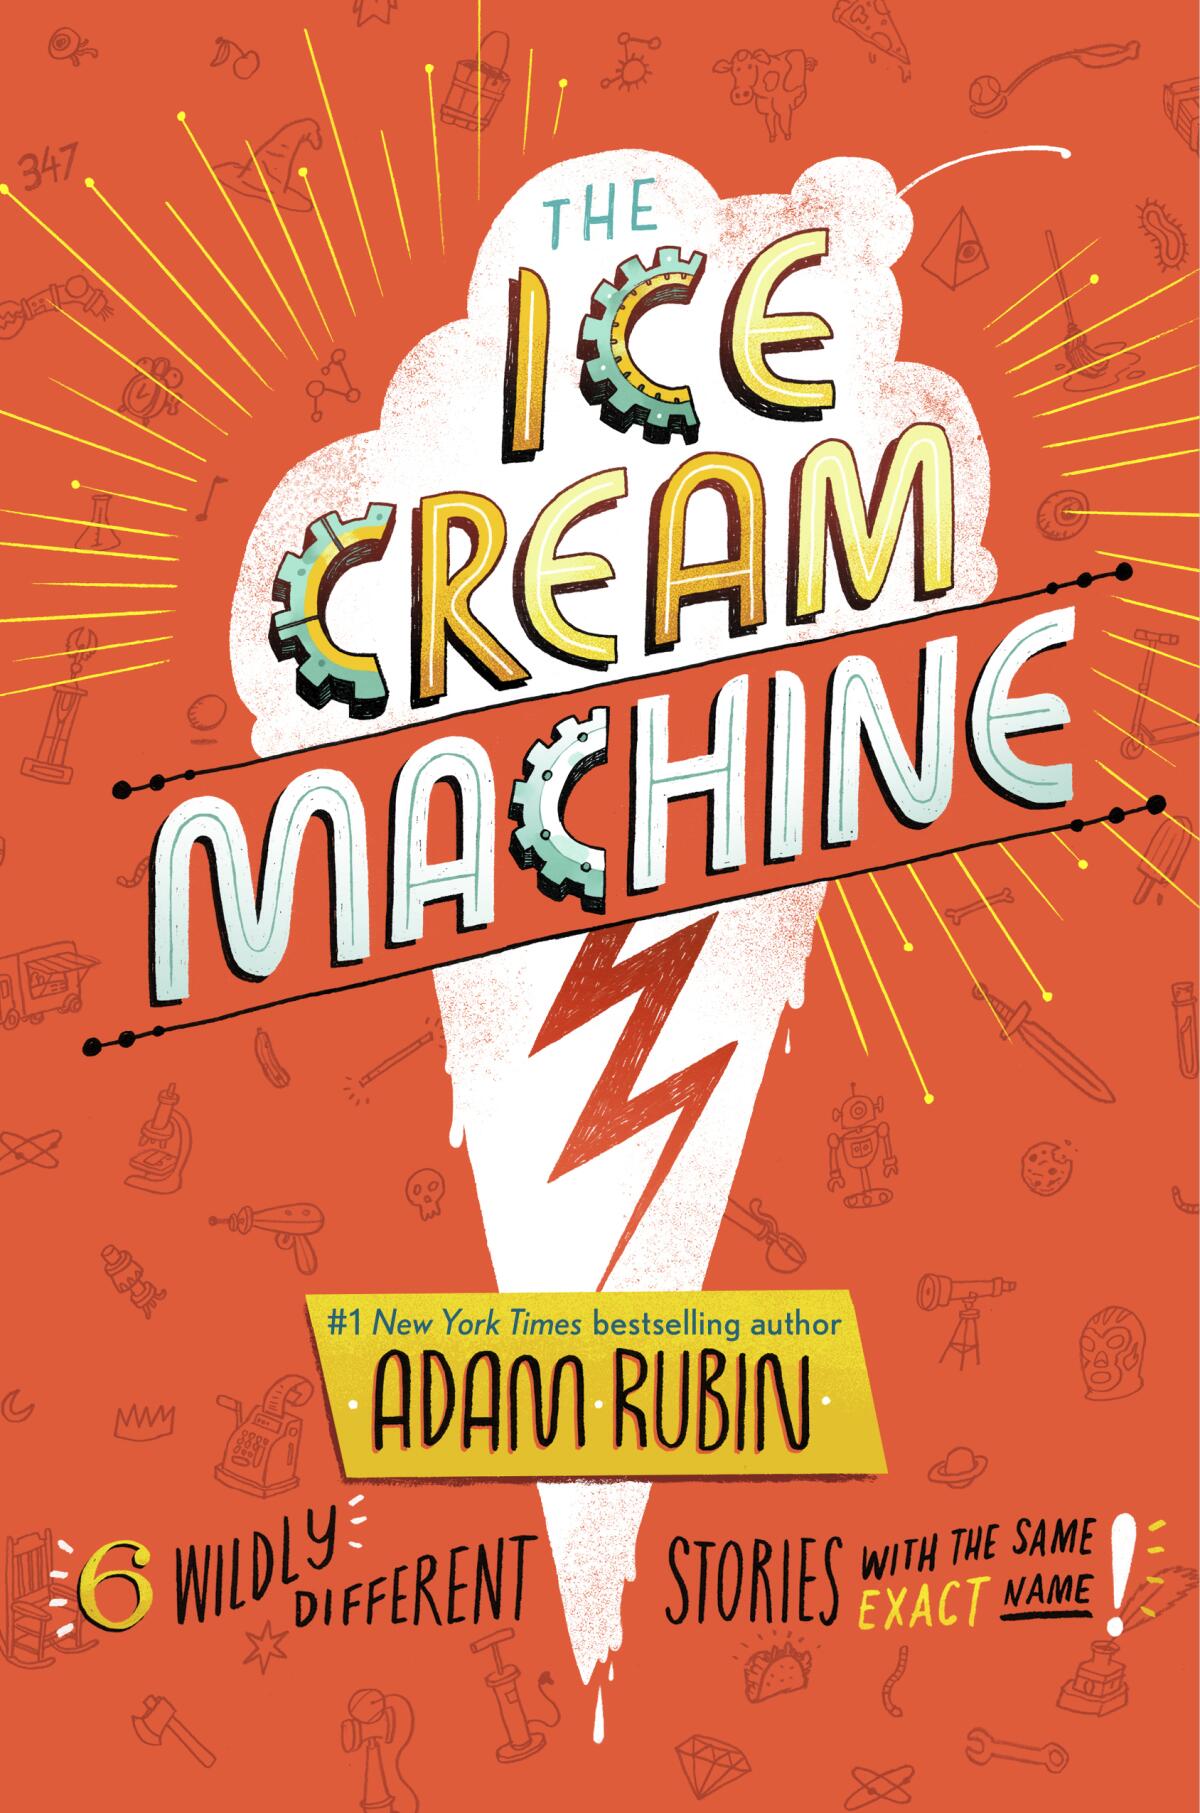 This cover image released by G. P. Putnam’s Sons Books for Young Readers shows "The Ice Cream Machine," a collection of six humorous stories raging from science fiction to adventure narratives by Adam Rubin. (G. P. Putnam’s Sons Books for Young Readers via AP)